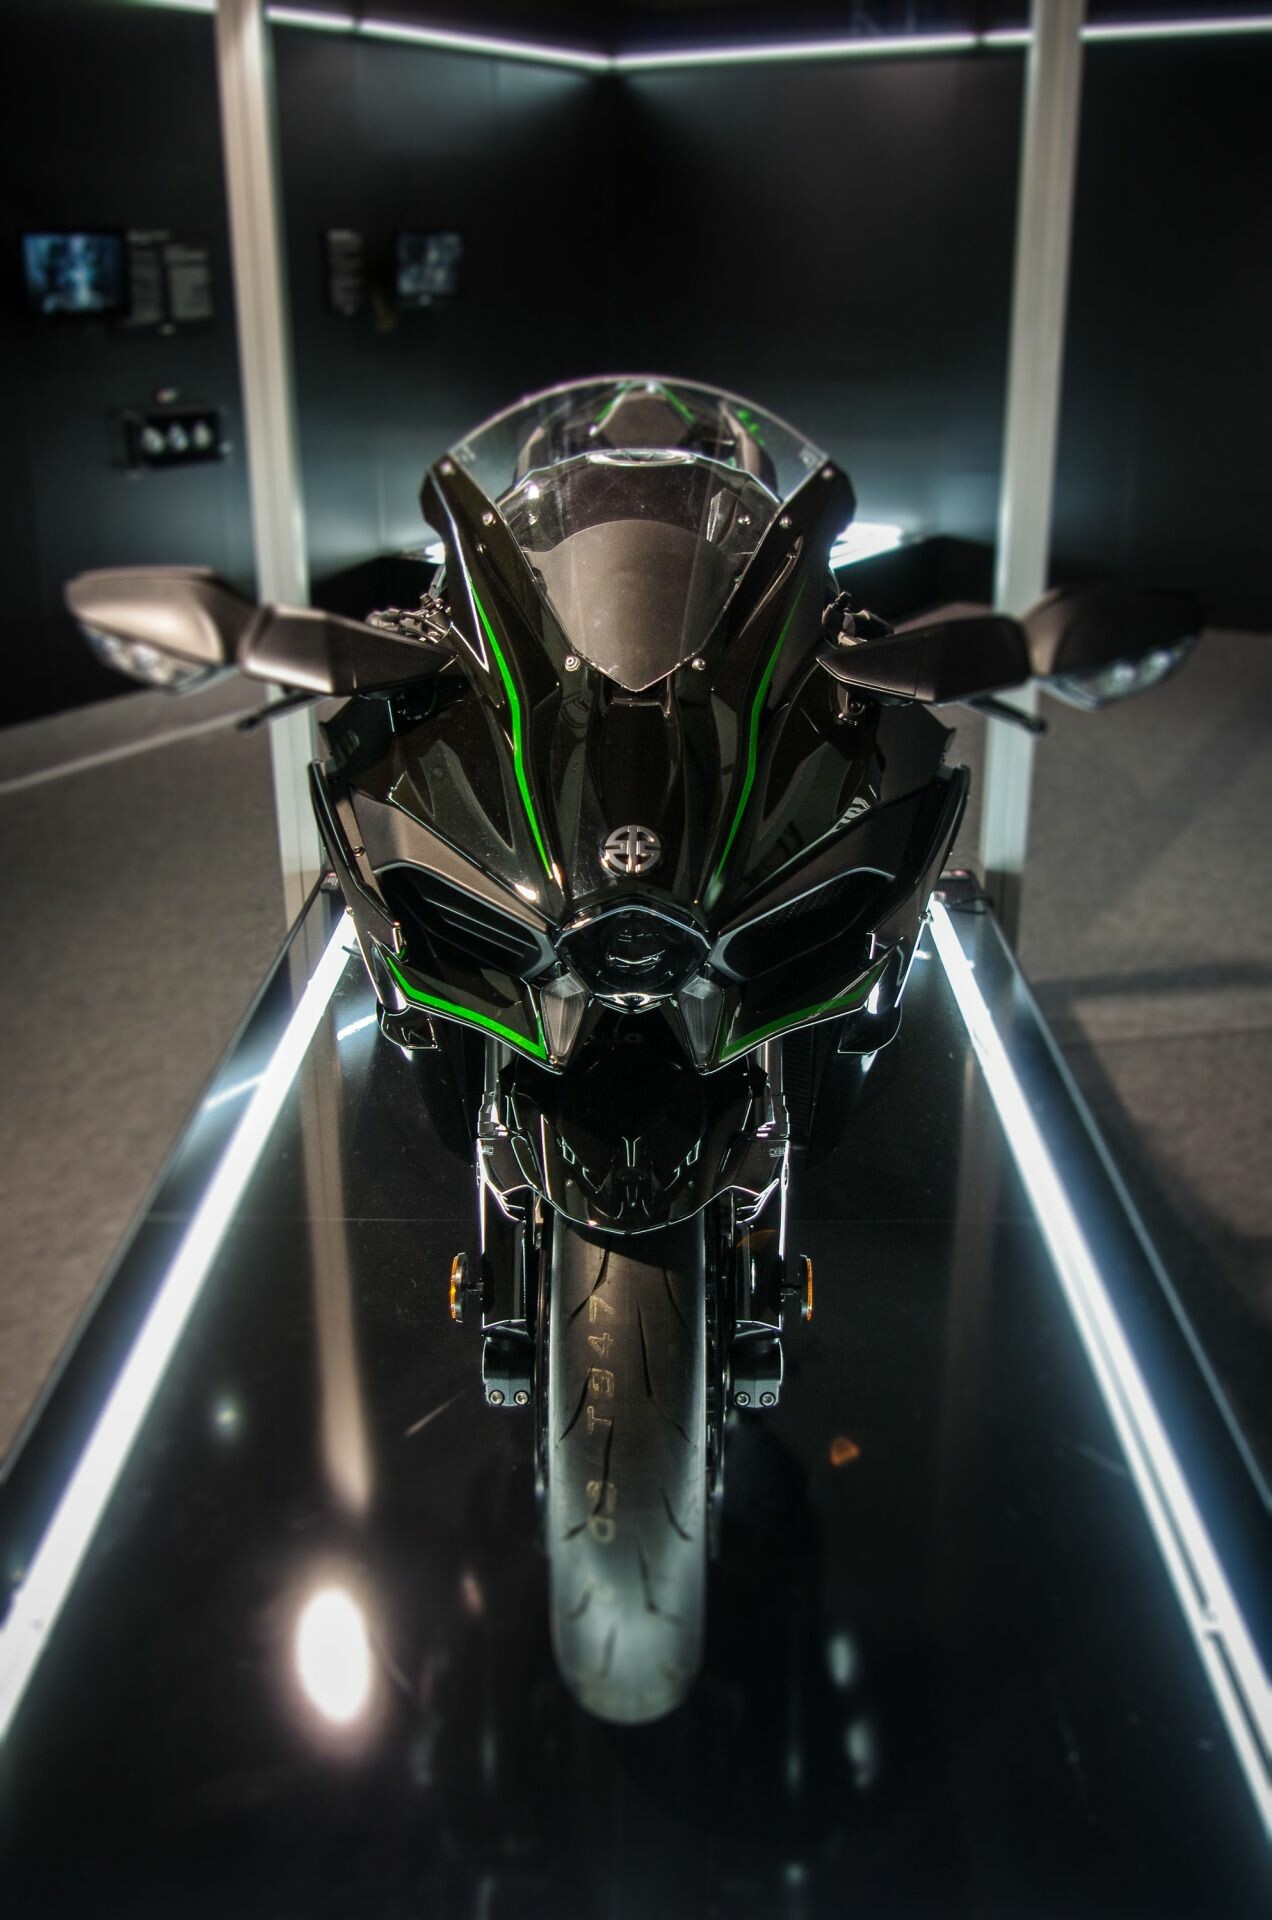 Kawasaki: Ninja H2, The first production motorcycle with a supercharger. 1280x1920 HD Background.